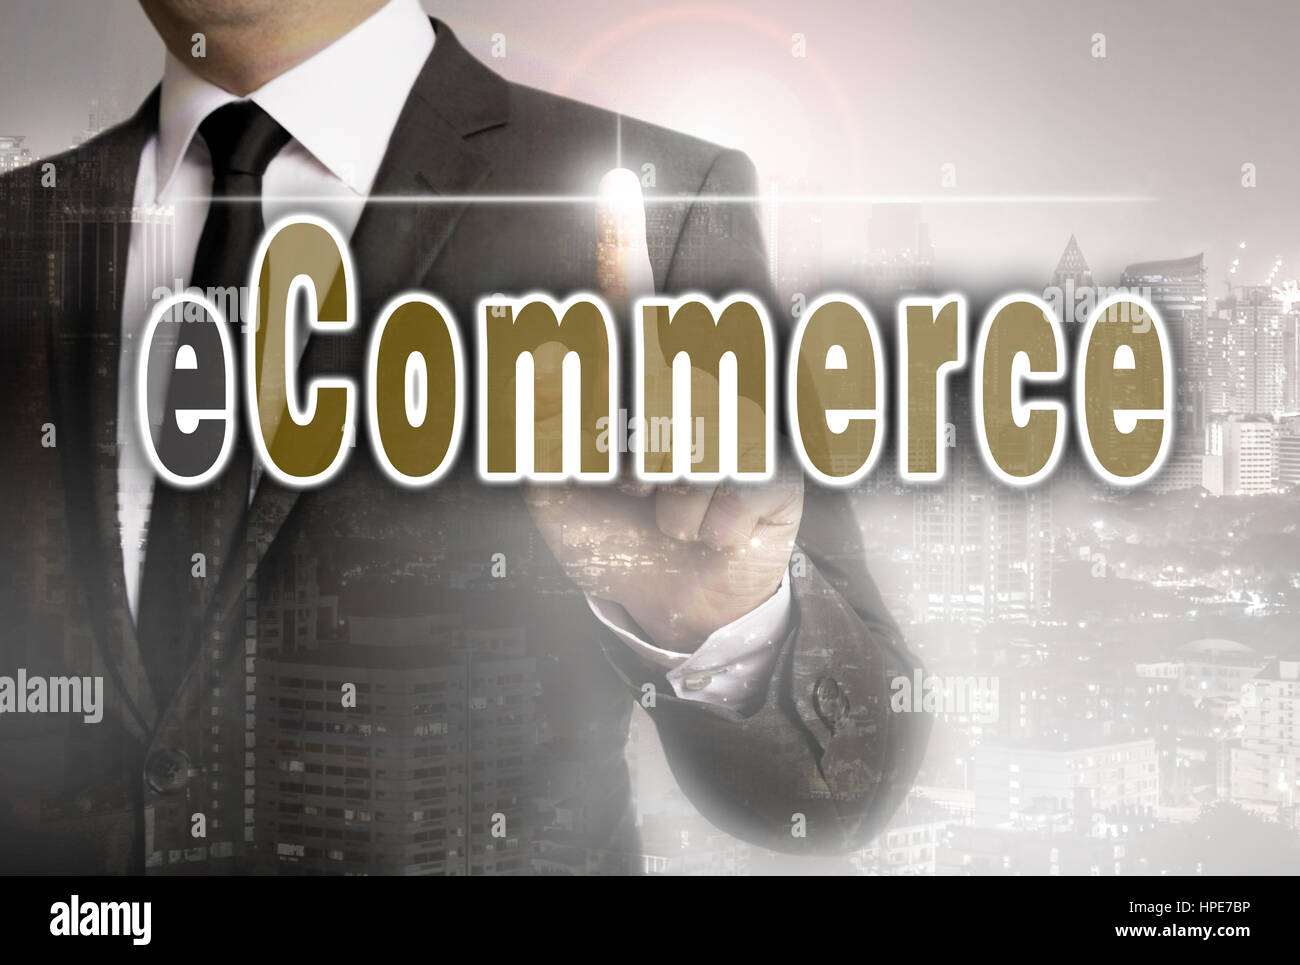 E commerce is shown by businessman concept. Stock Photo